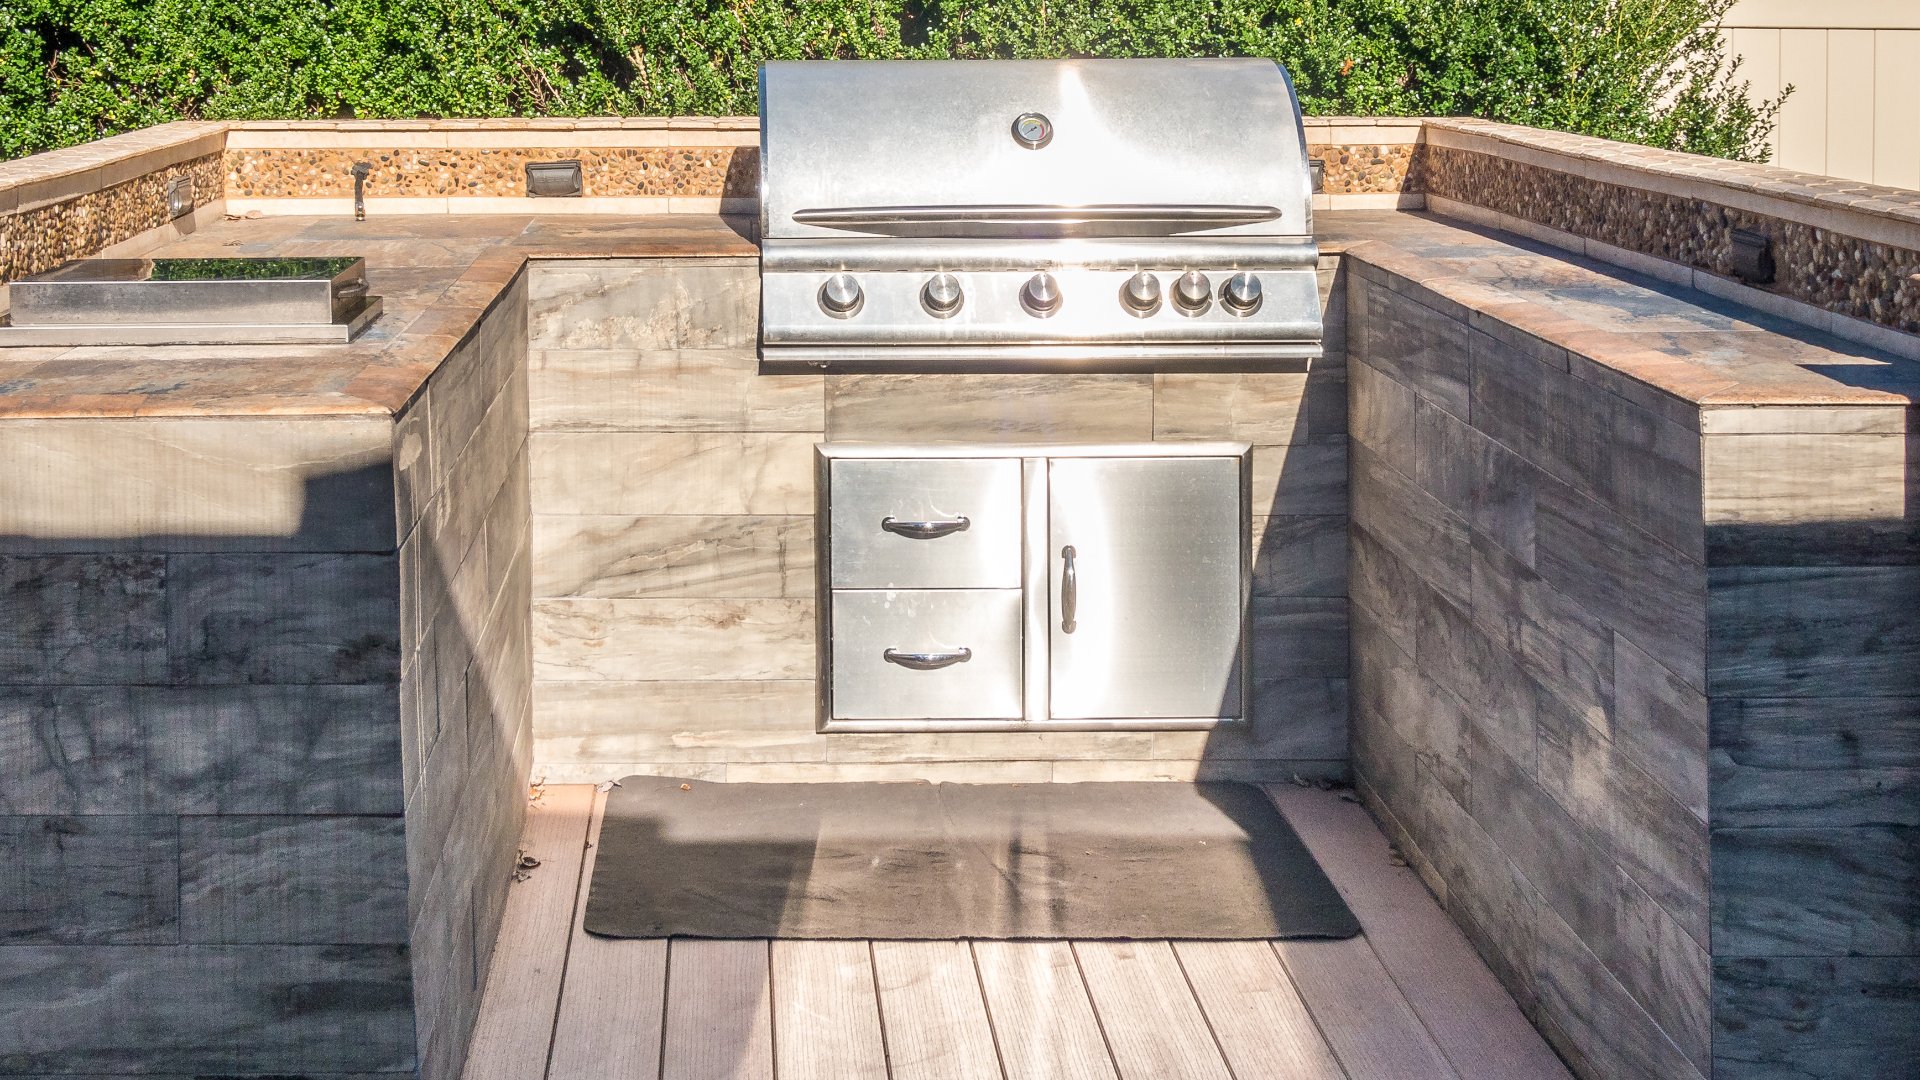 A pristine and newly installed outdoor kitchen at our client's home in Cleveland, MN.